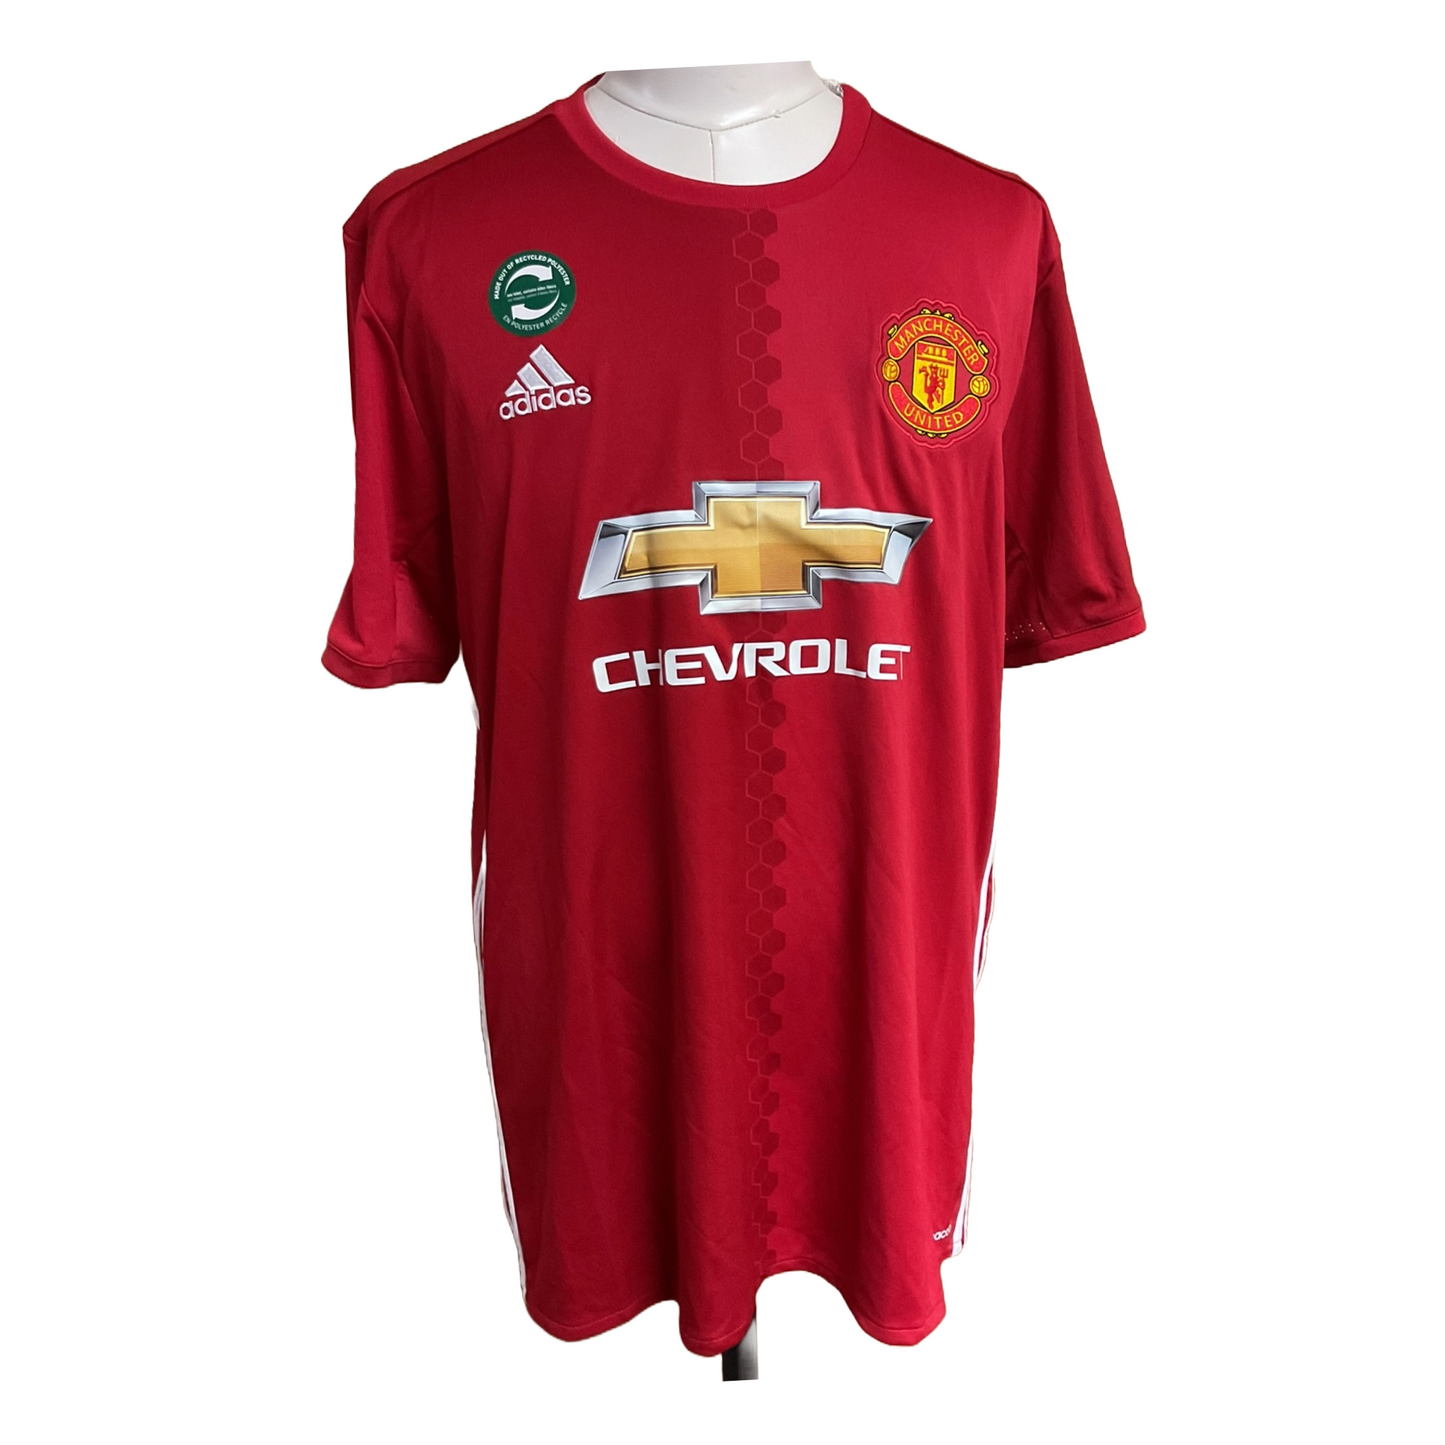 Adidas Climacool Manchester United Soccer Jersey for Men (XLarge) - Ibrahimovic 9